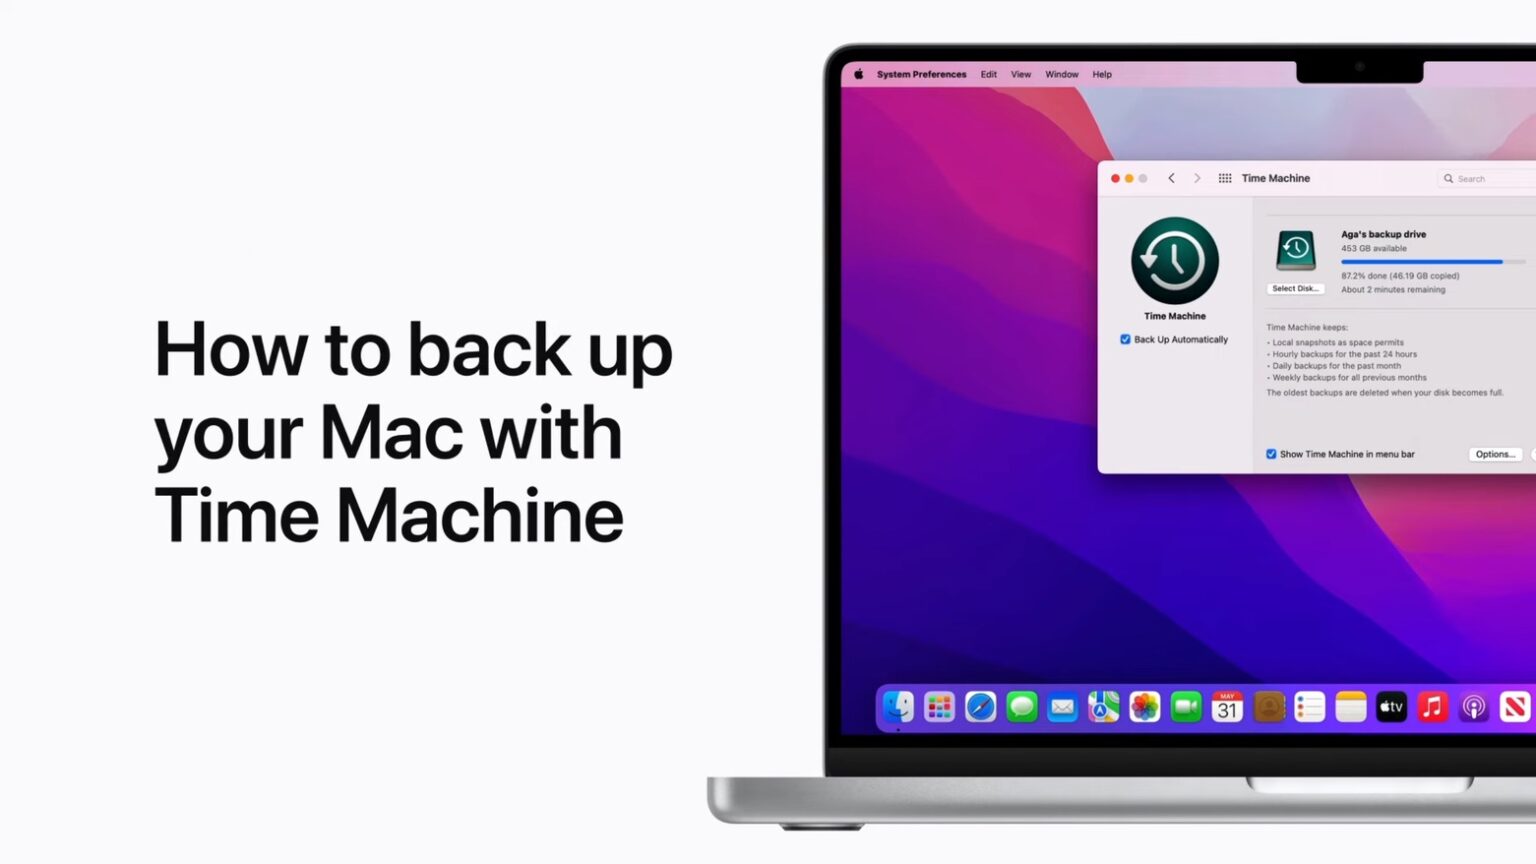 Apple video explains how to use Time Machine to backup your Mac